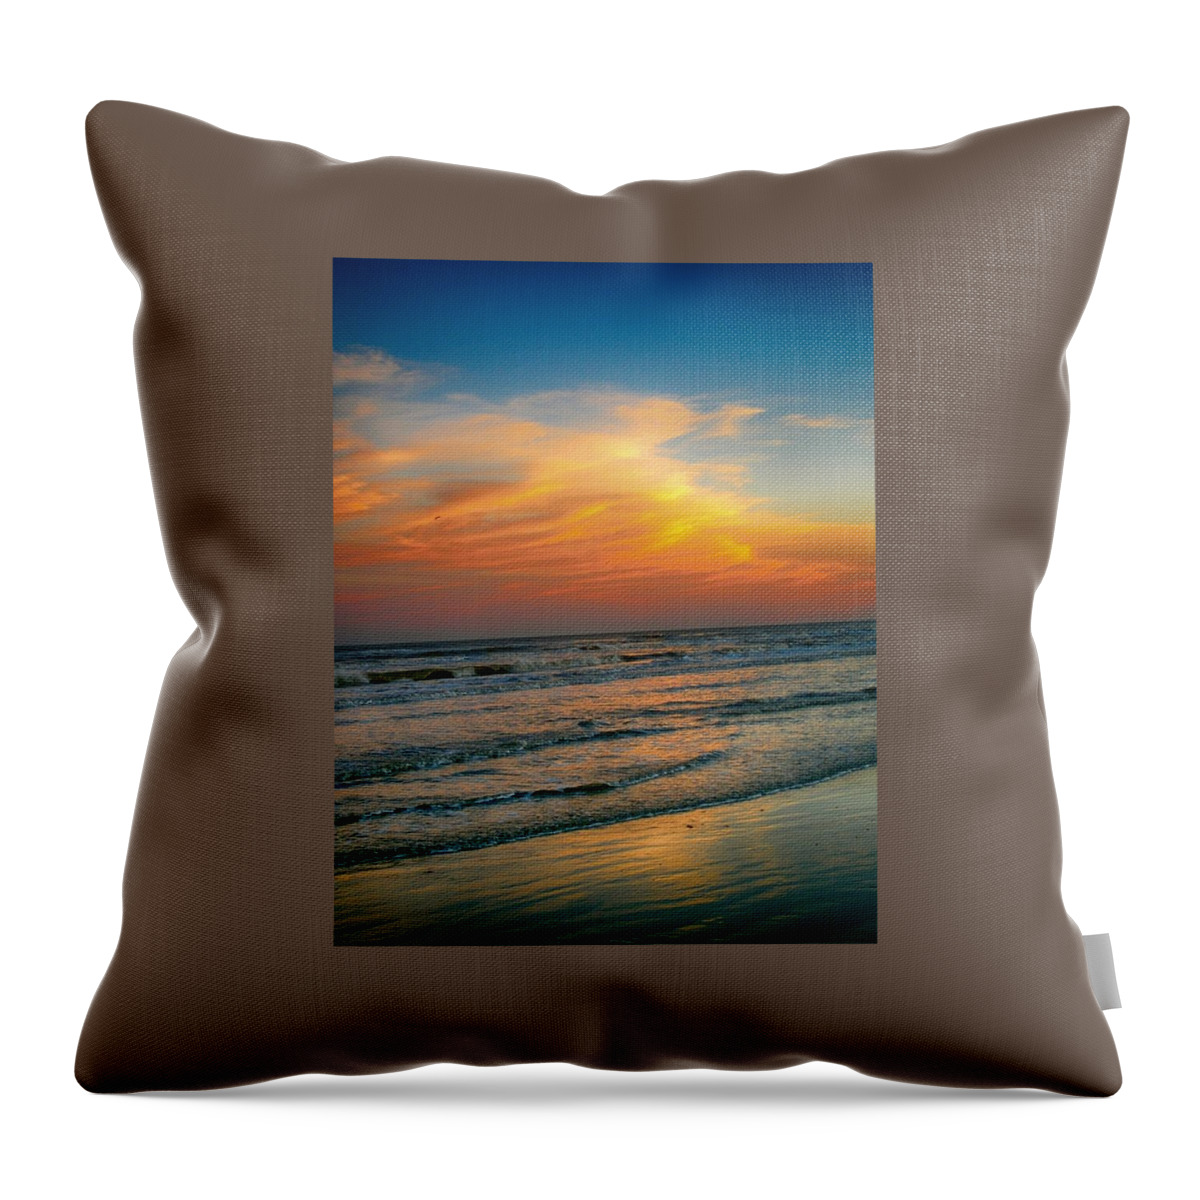 Relaxing Throw Pillow featuring the photograph Dreamy Gulf Coast Sunset by Kristina Deane